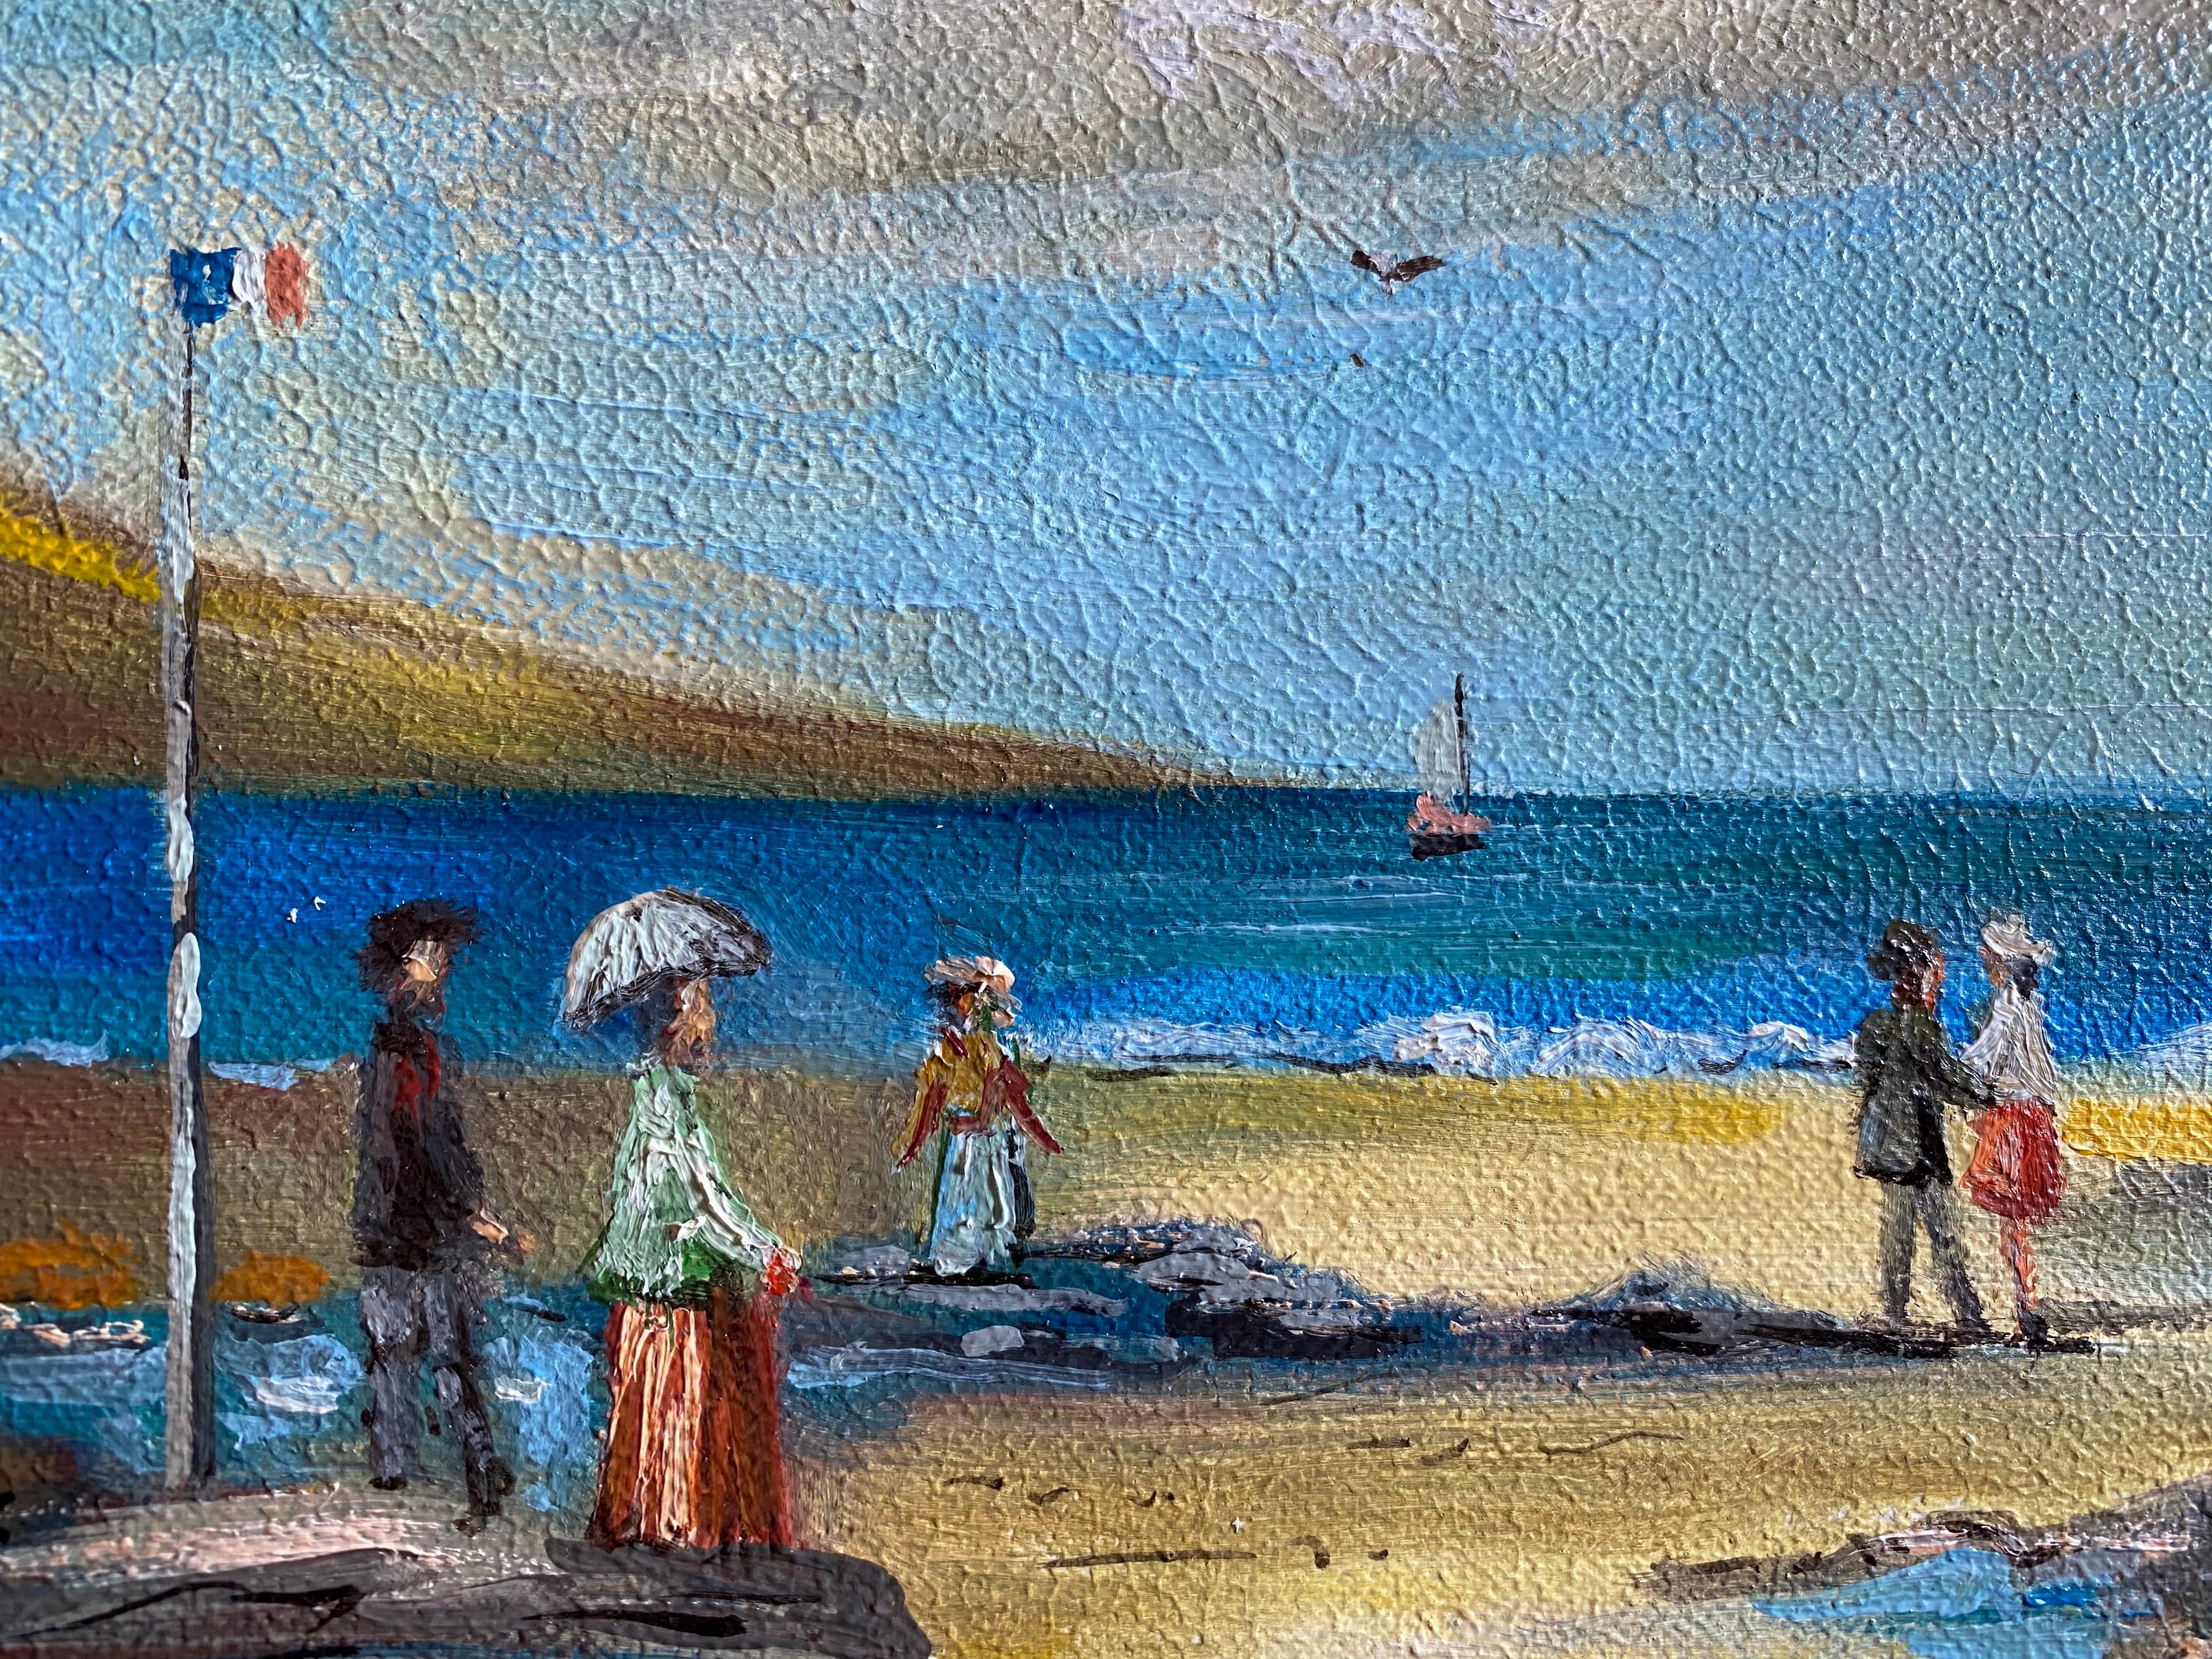 Elegant Figures Enjoying A Day At A French Beach - Painting by Michel Pabois